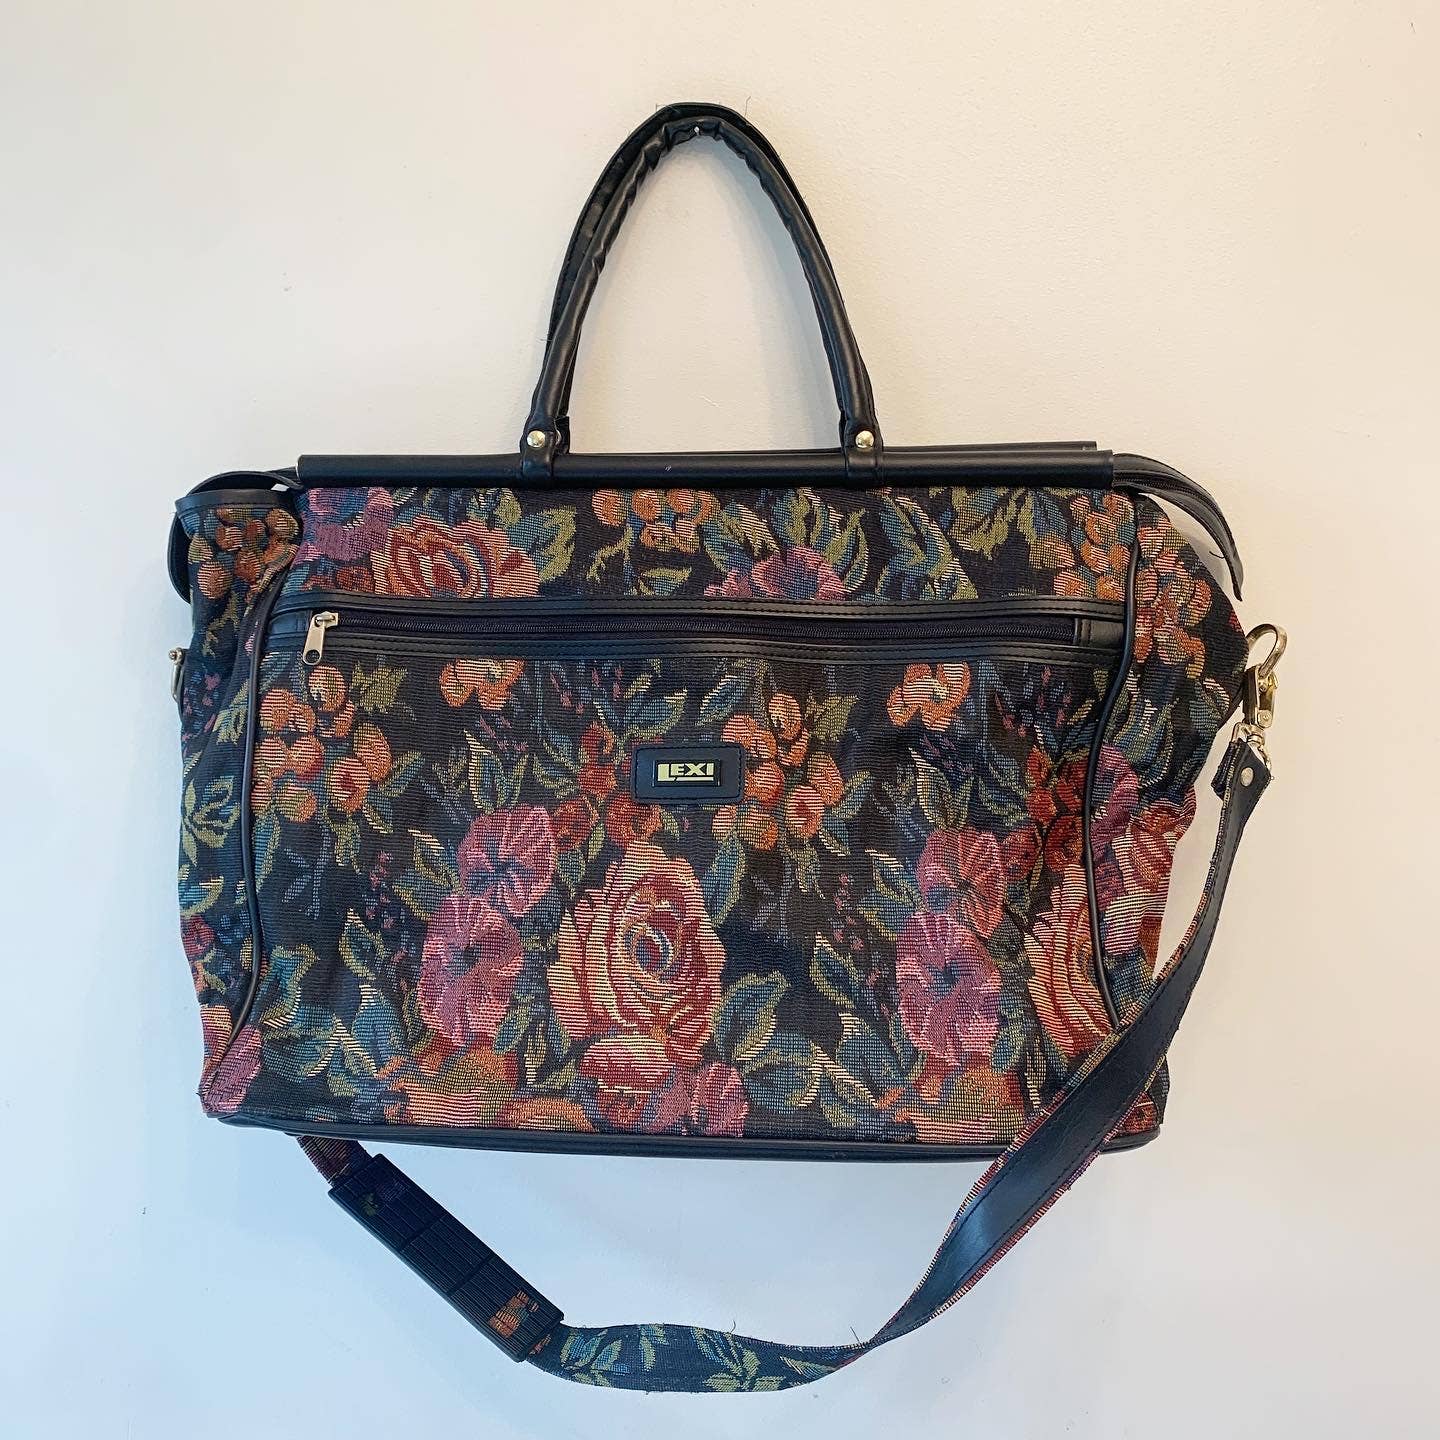 Vintage Lexi Tapestry Floral Duffle Luggage Travel Bag